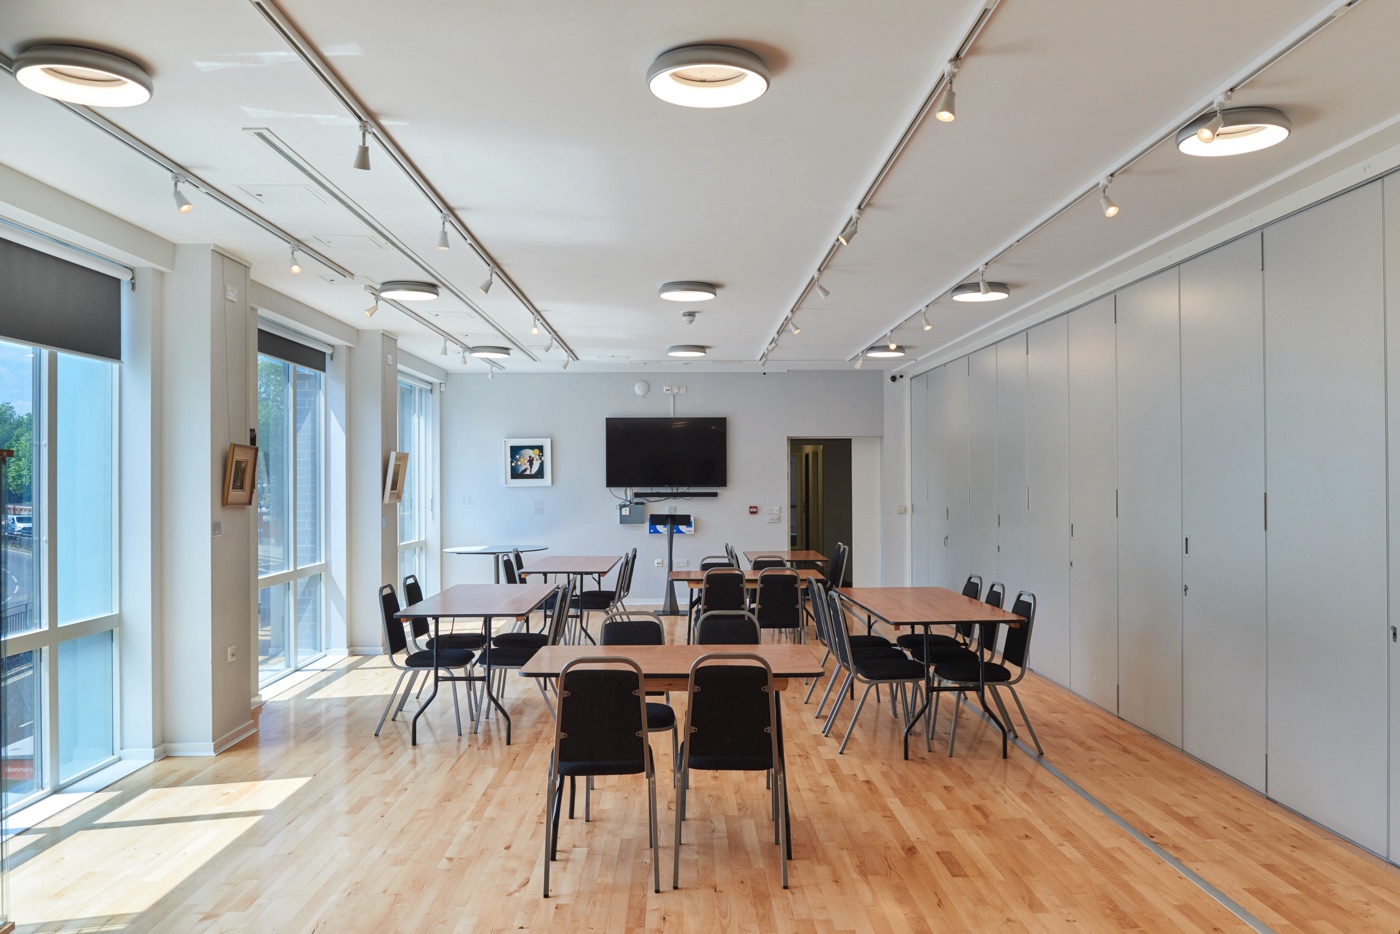 The ICC have many rooms for hire in London including the mezzanine.